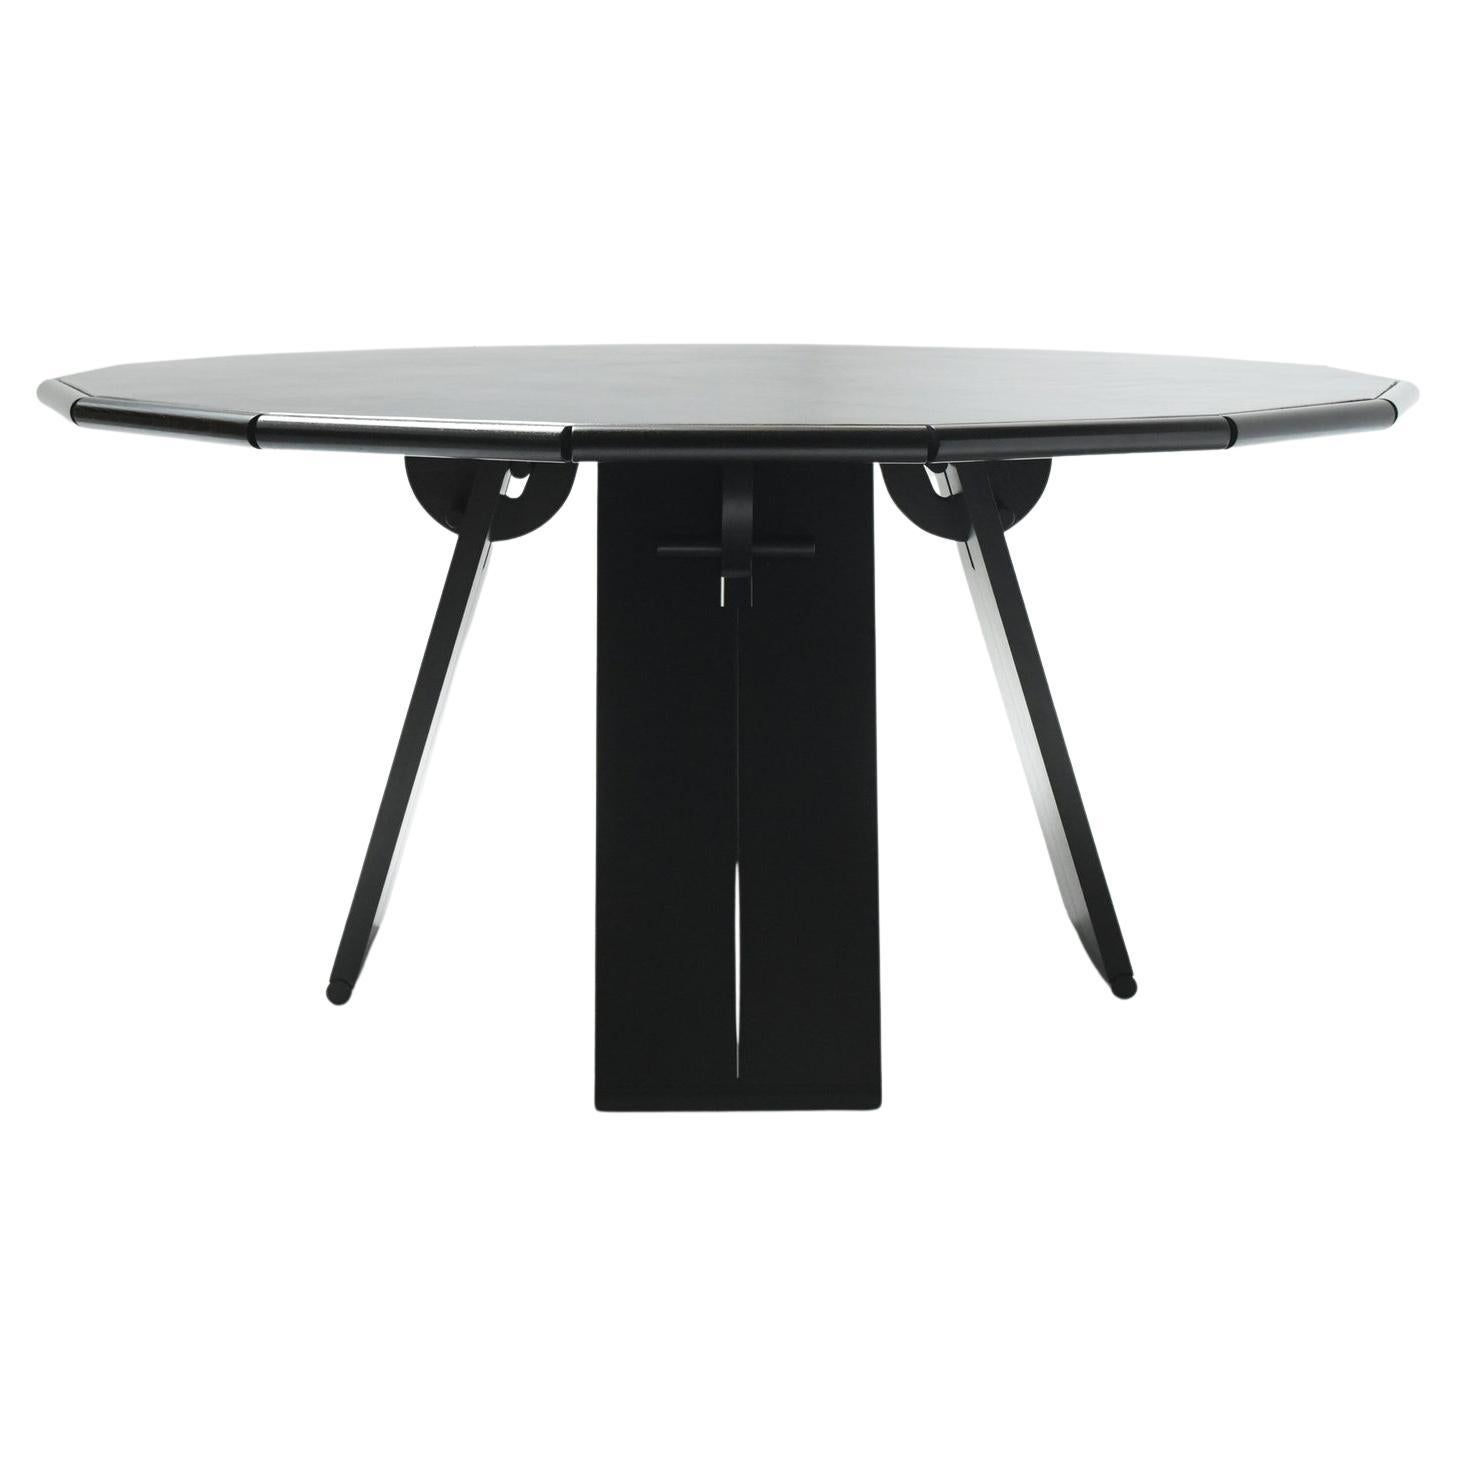 Extremely Rare La Loggia Table Black Wood/Leather by Mario Bellini for Cassina